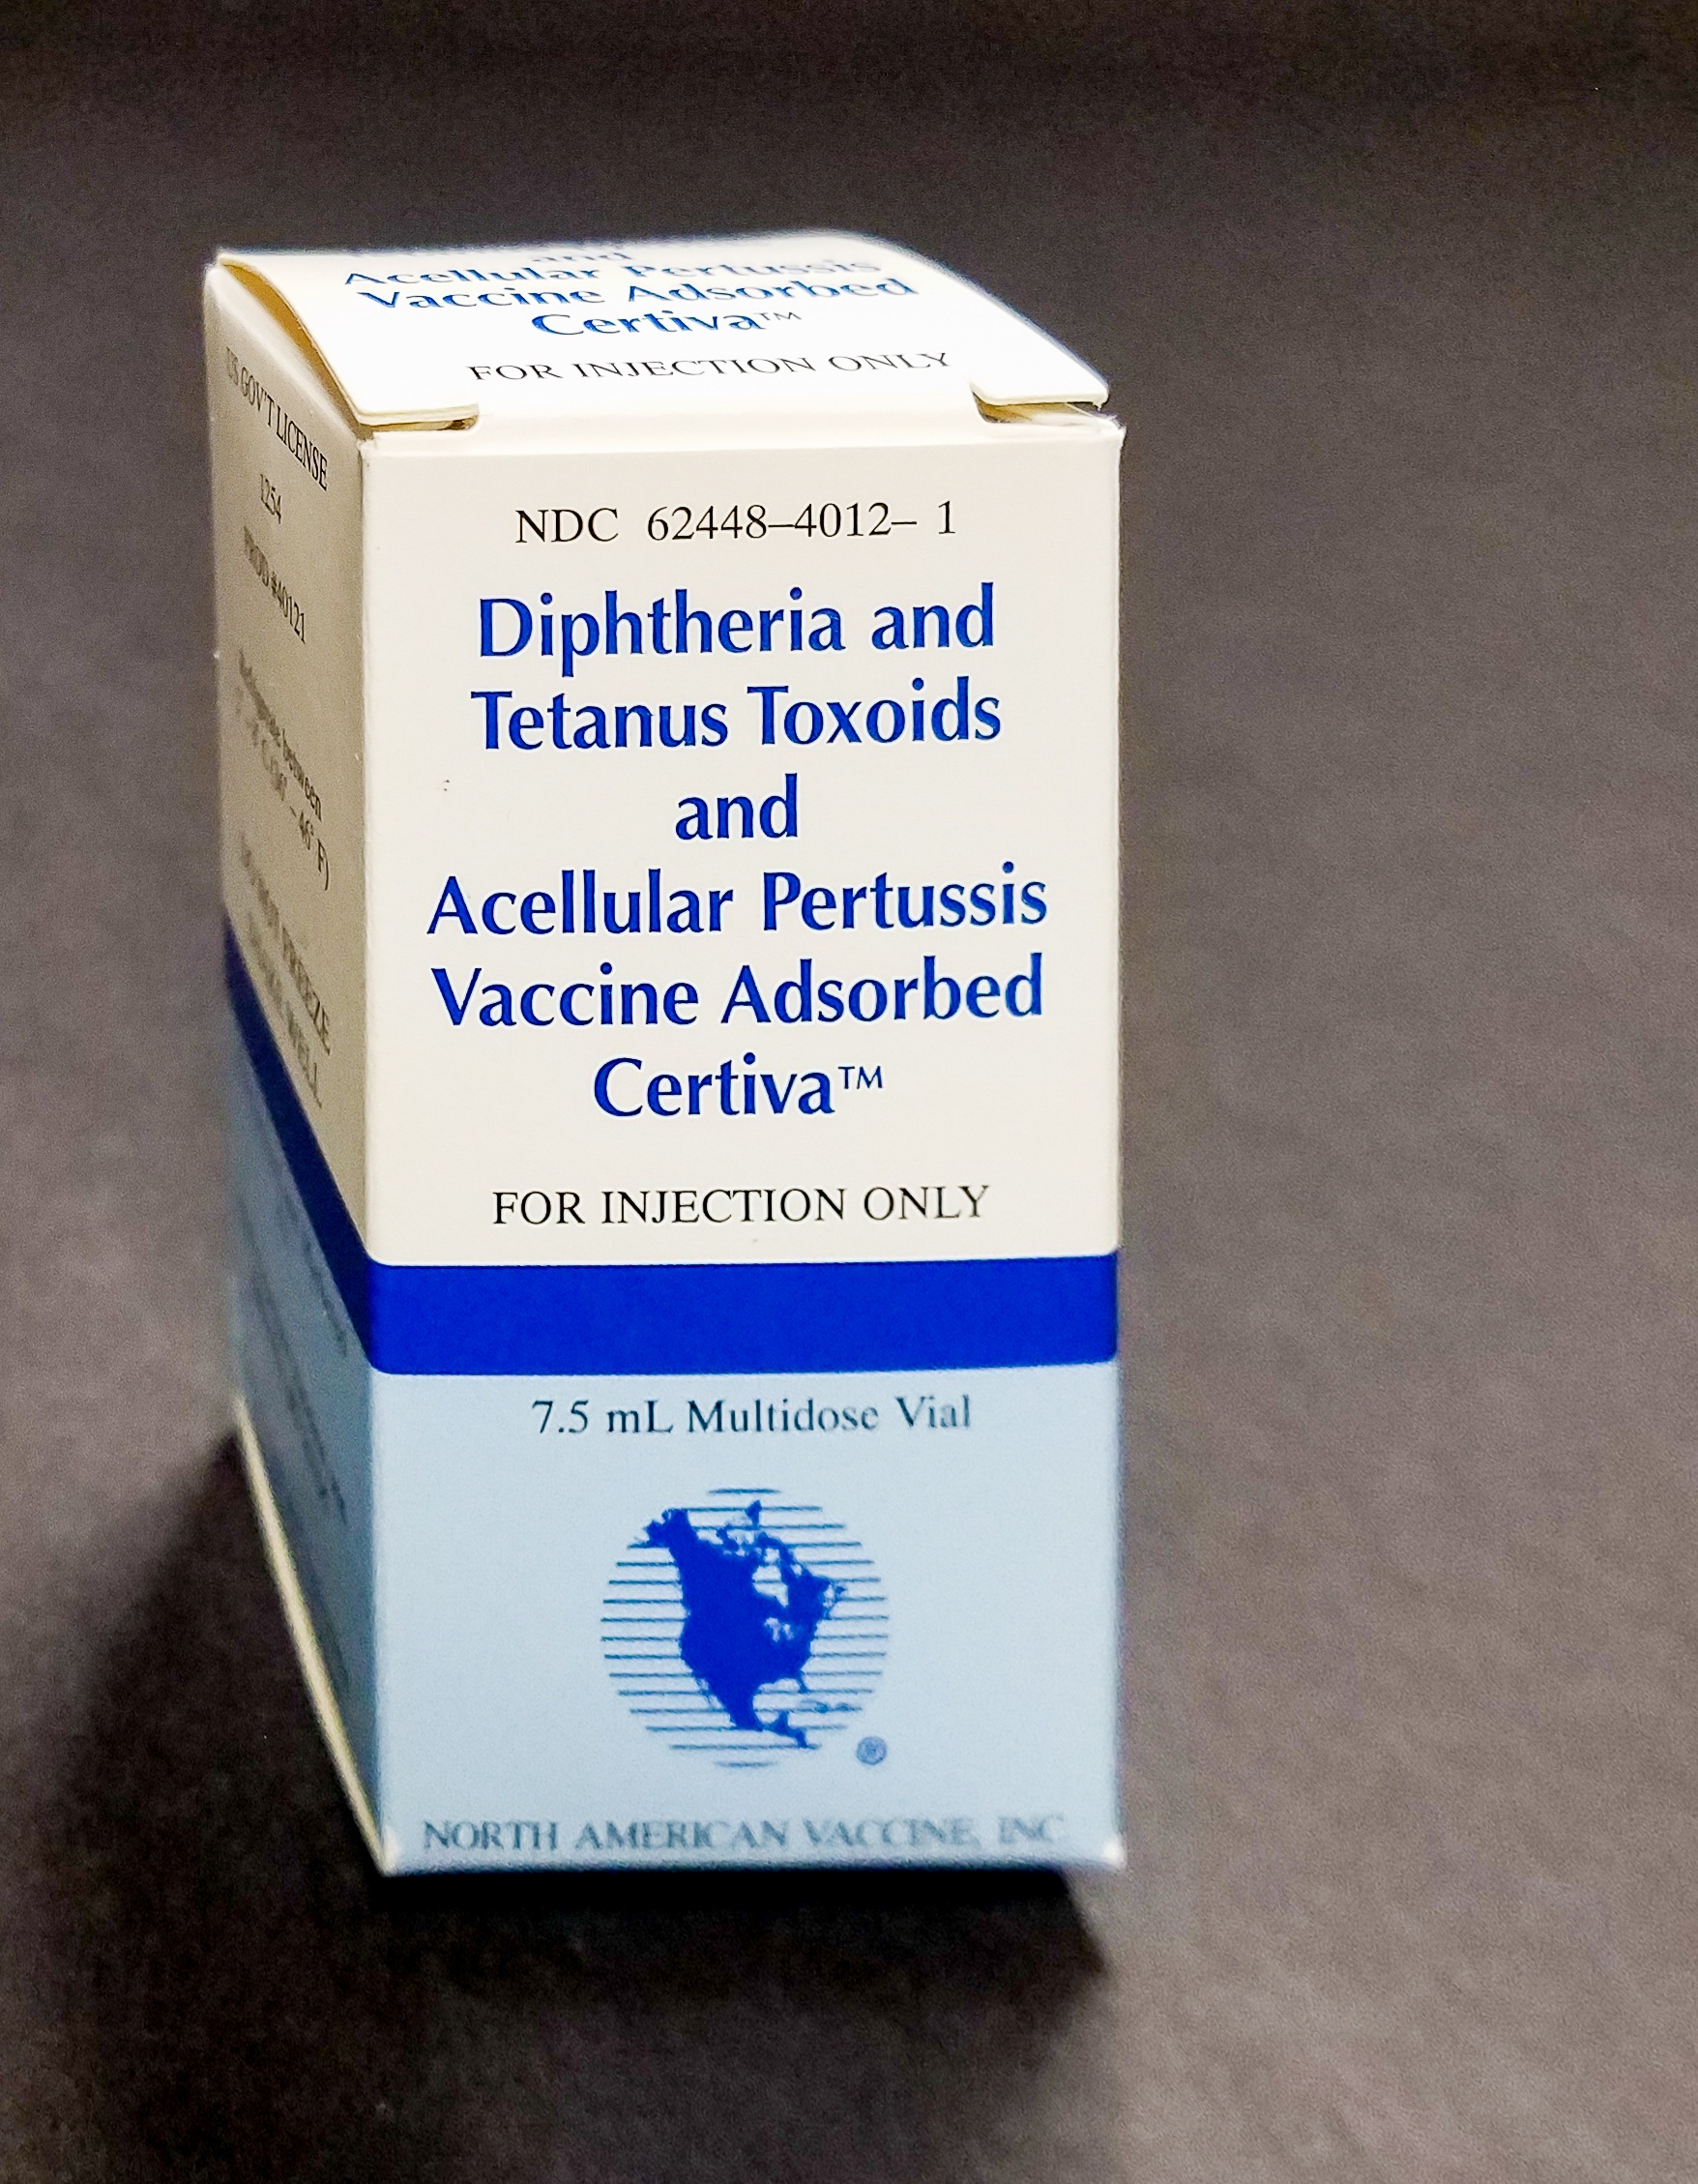 a box with a vial of North American Vaccine, Inc. Diphtheria and Tetanus Toxoids and Acellular Pertussis Vaccine from 1990s. 